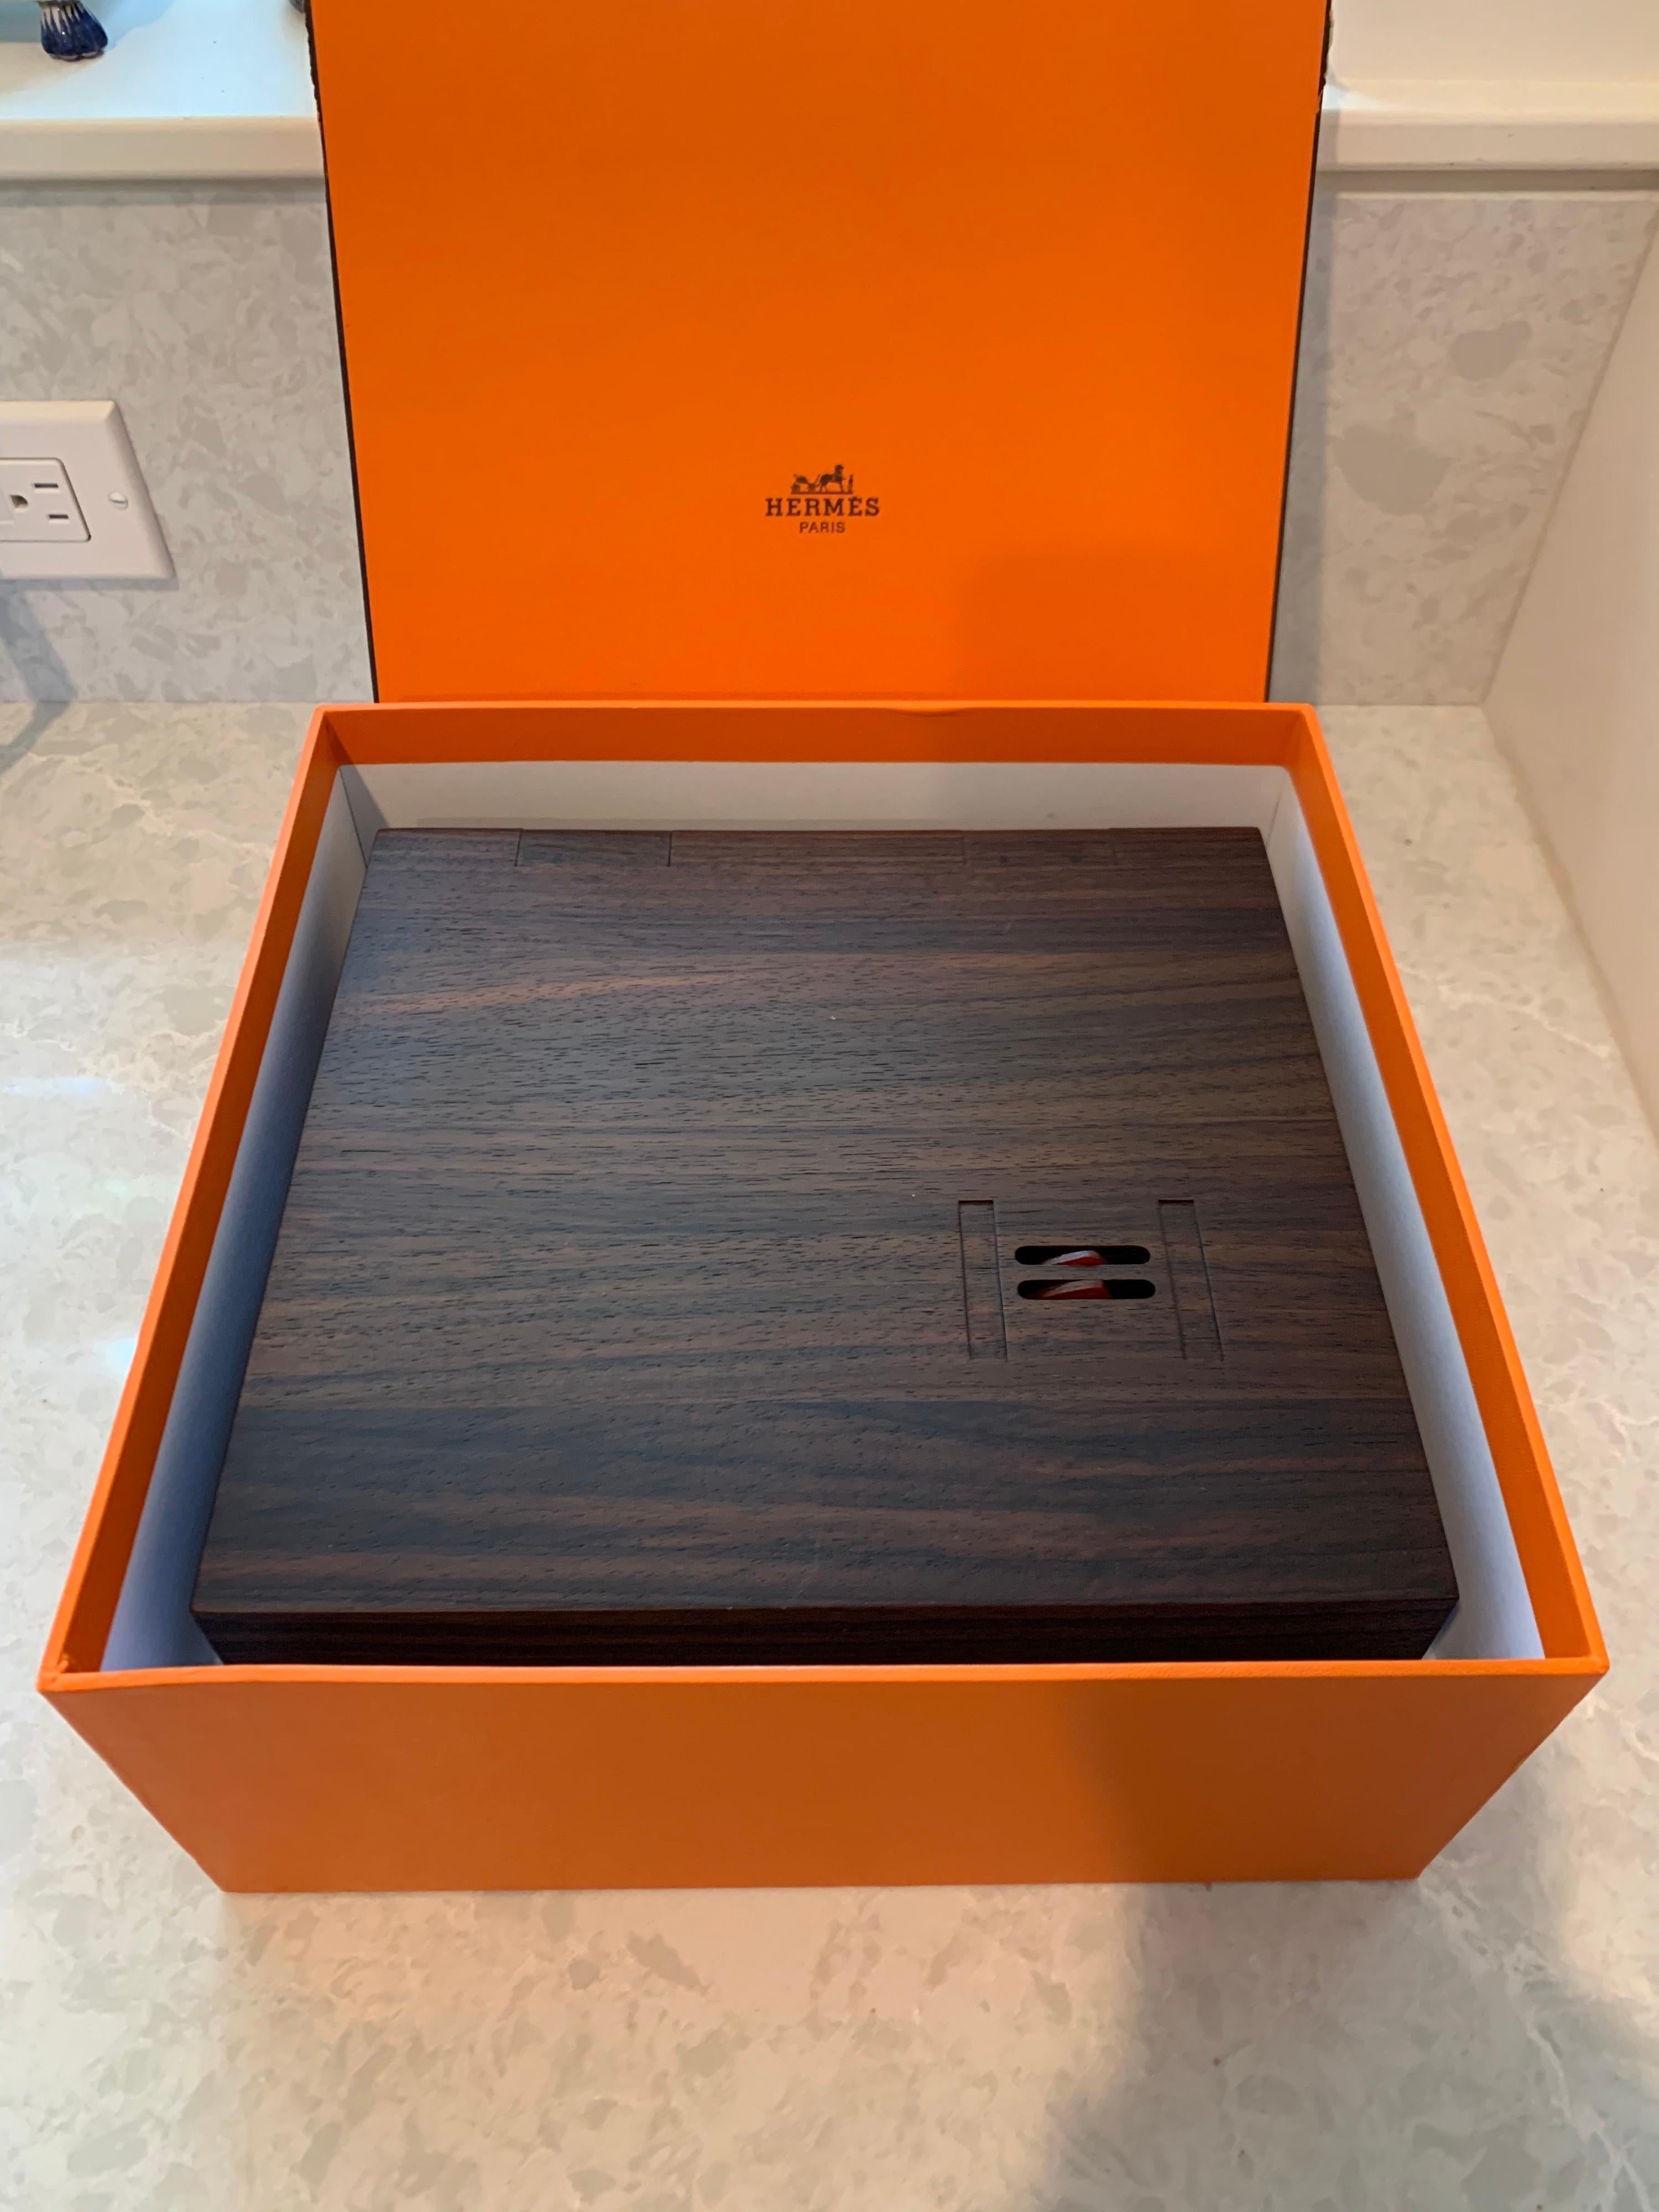 Rare limited edition custom wood and leather Hermes desk top stationary set that has never been used
and comes with original Hermes orange box. The perfect gift for the person who thought they had everything.